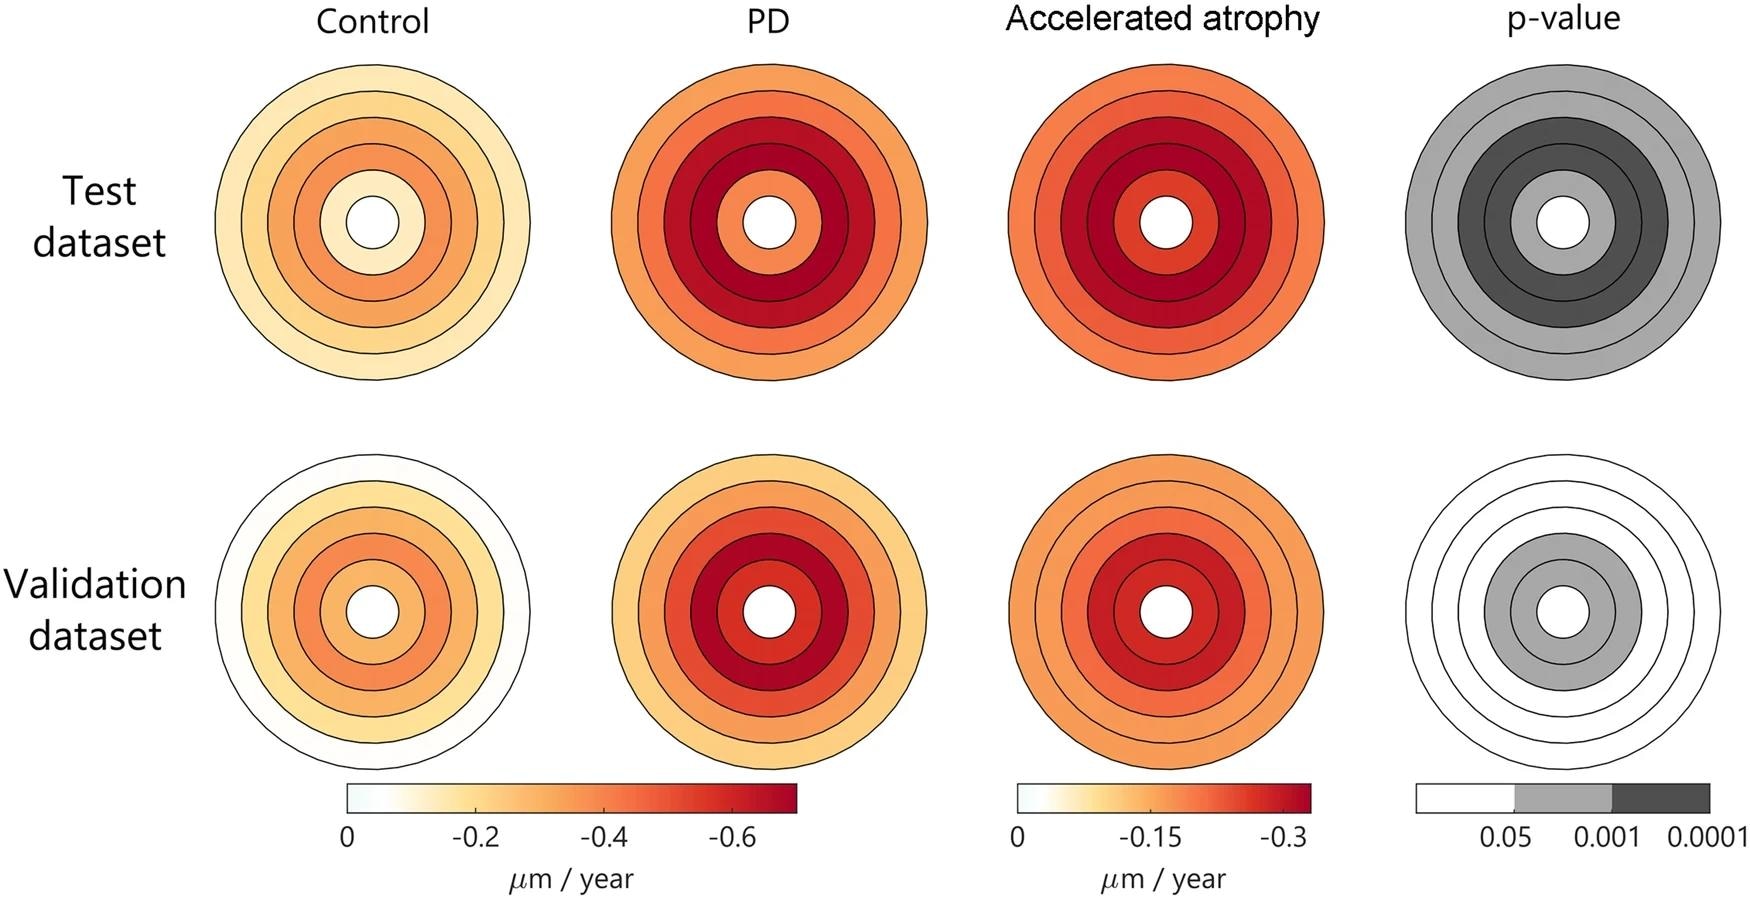 ​​​​​​​Using linear mixed-effects models adjusted for age at baseline and sex. Color represents the estimated atrophy rate in each foveo-centered area. Absolute rates are represented in the first two columns. The relative increase in PD vs. control is represented on the third column, and the corresponding significant p-values for group effect are represented in gray scale. Abbreviations: GCIPL: ganglion cell-inner plexiform layers; PD, Parkinson’s disease.